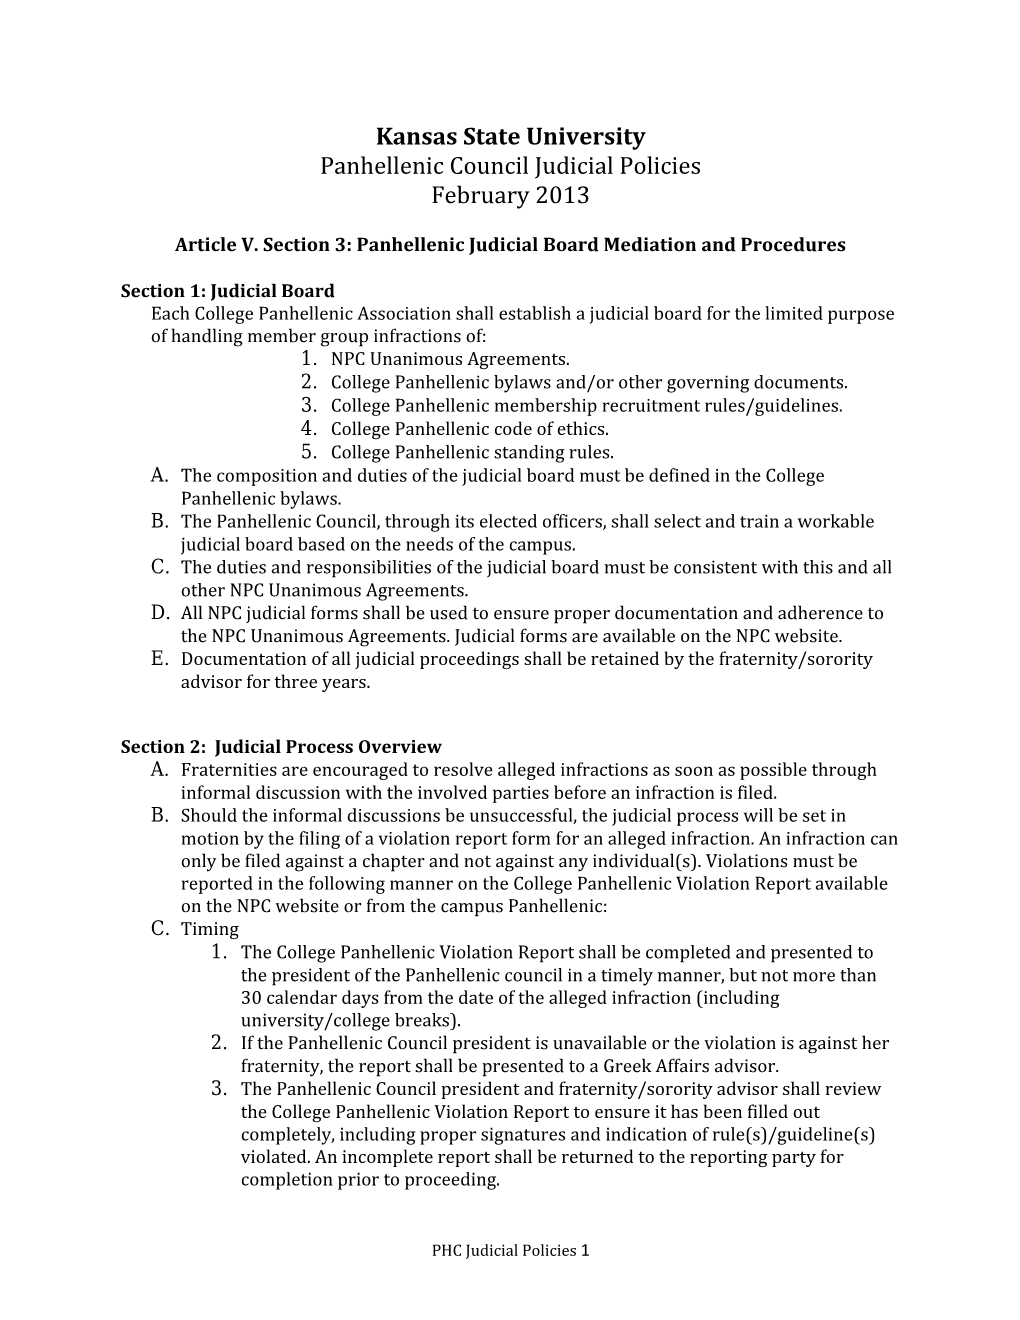 Article V. Section 3: Panhellenic Judicial Board Mediation and Procedures